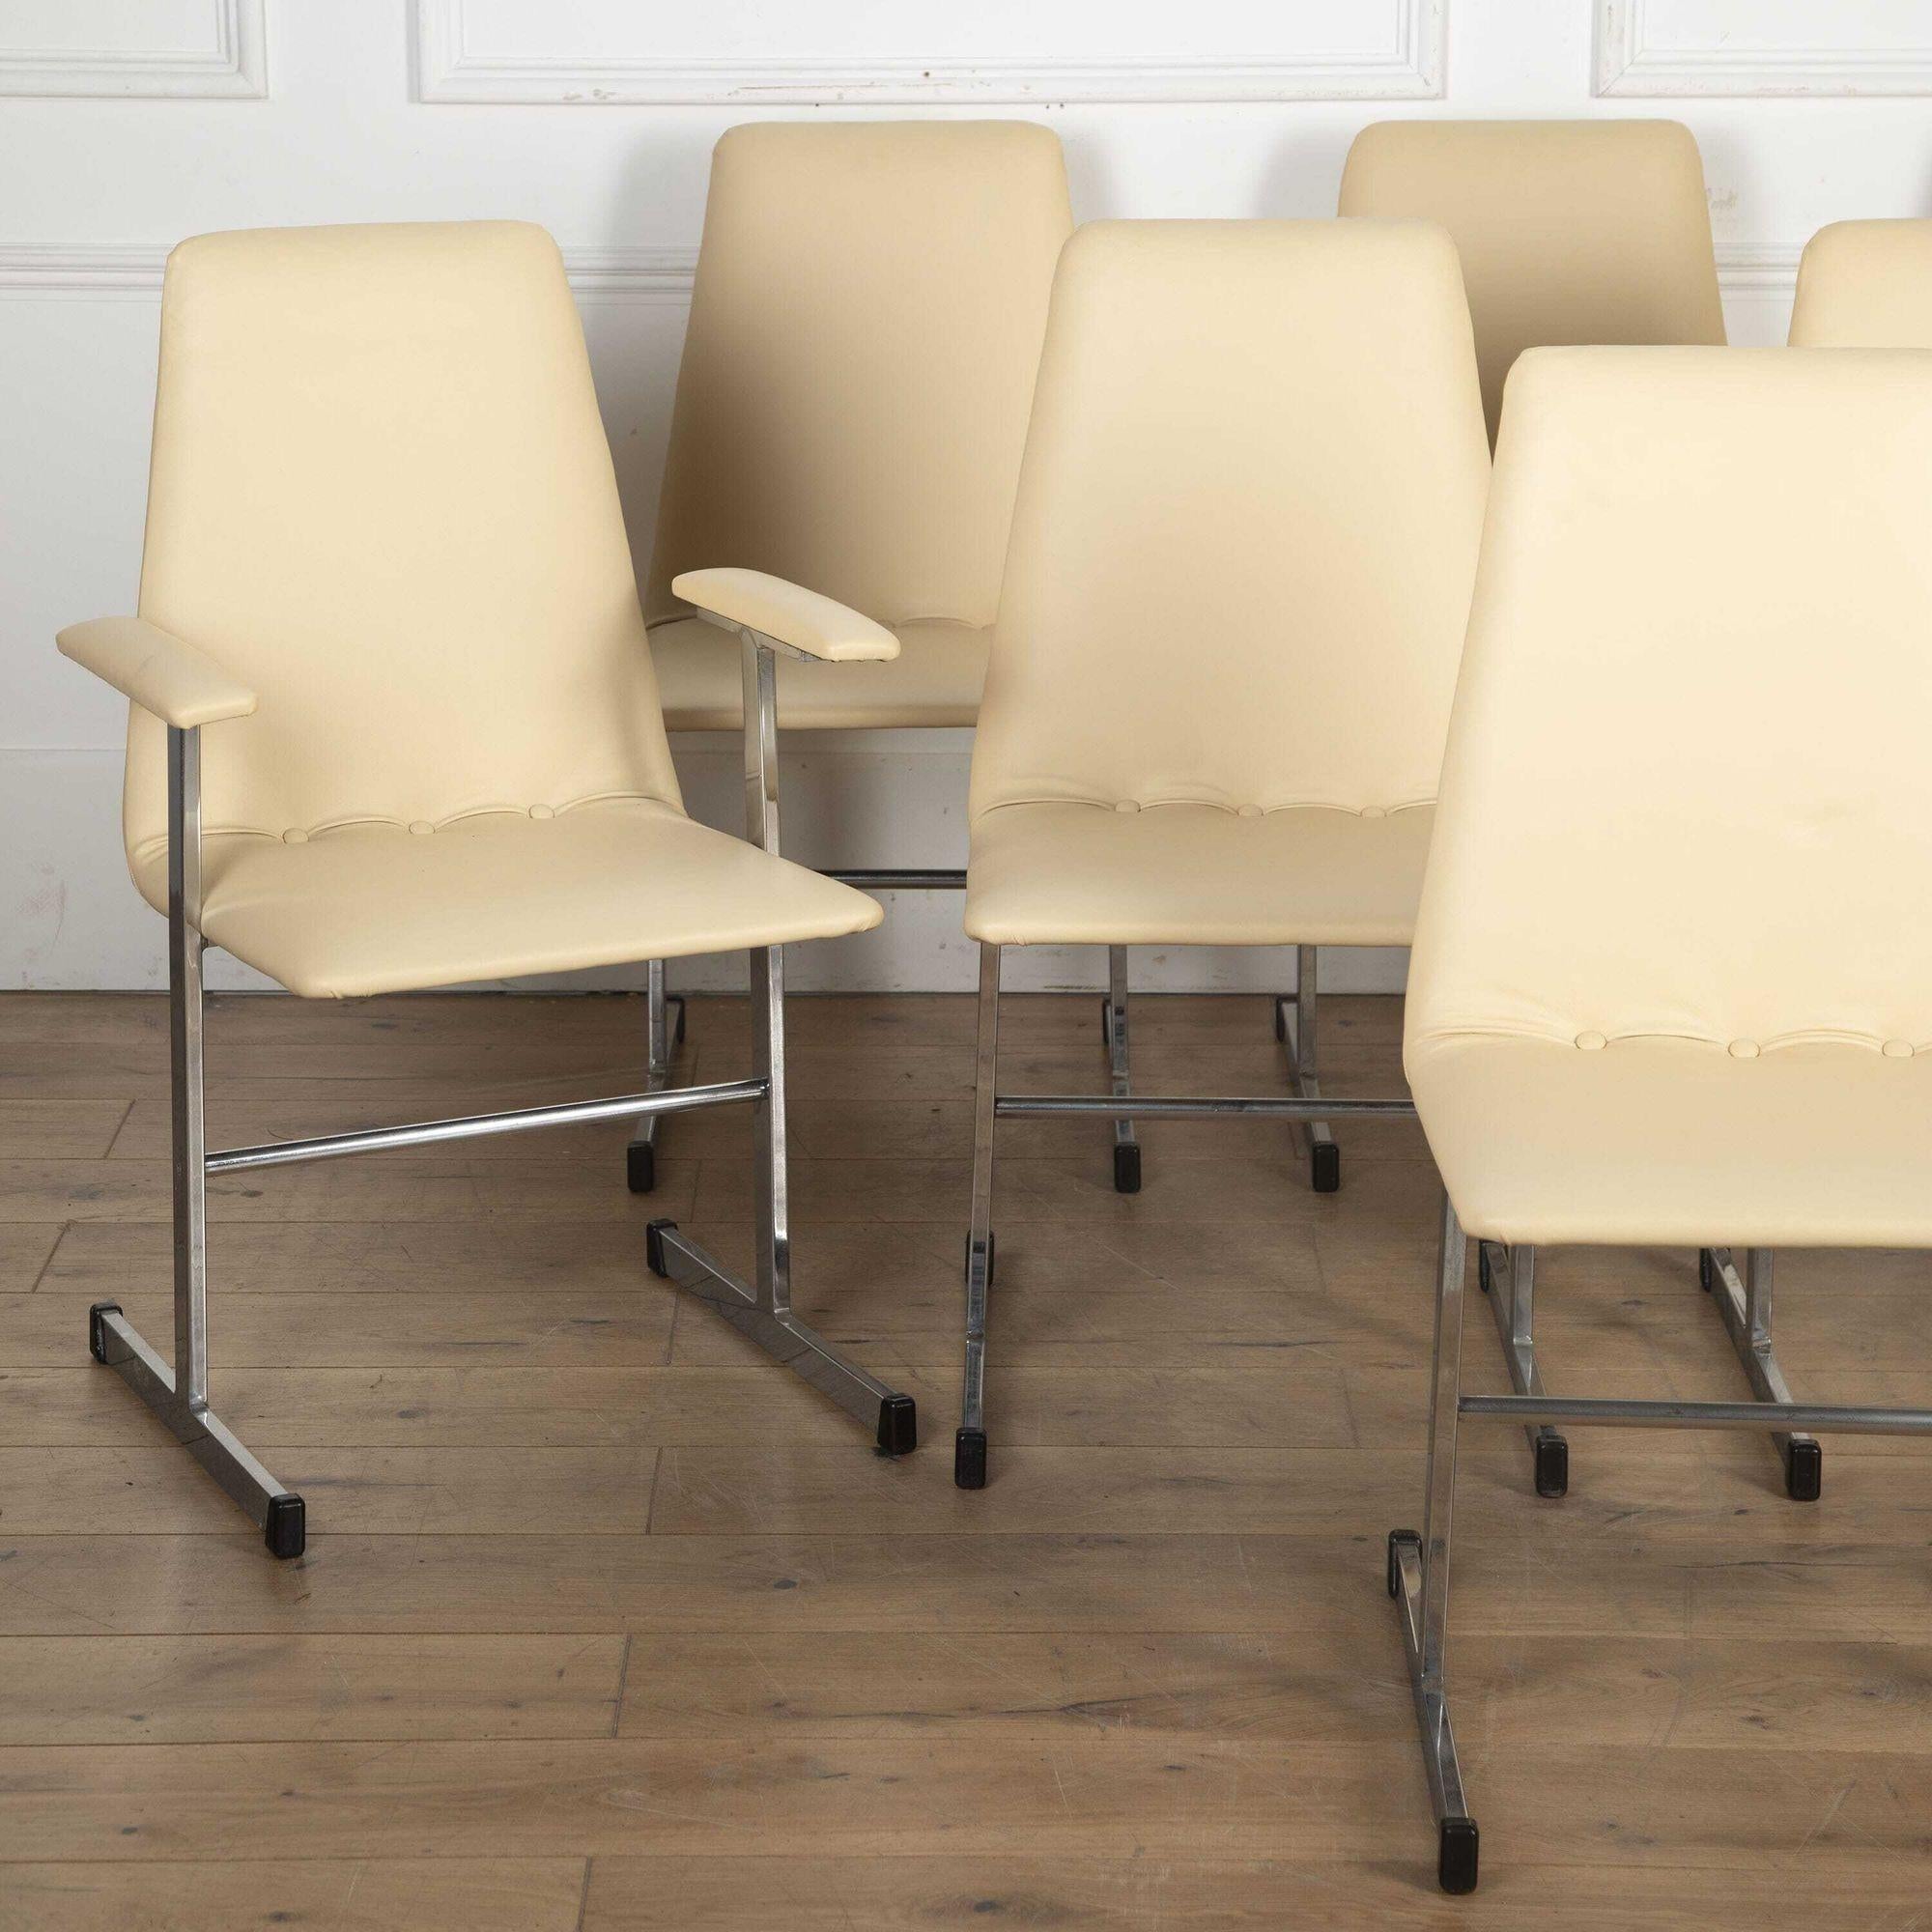 Great set of eight Mid-Century Italian designer dining chairs in ivory leather and chrome framing.
Unmarked but are believed to be attributed to Offredi for Saporiti Pamono, circa 1970.
A superb set of chairs that will highlight any contemporary